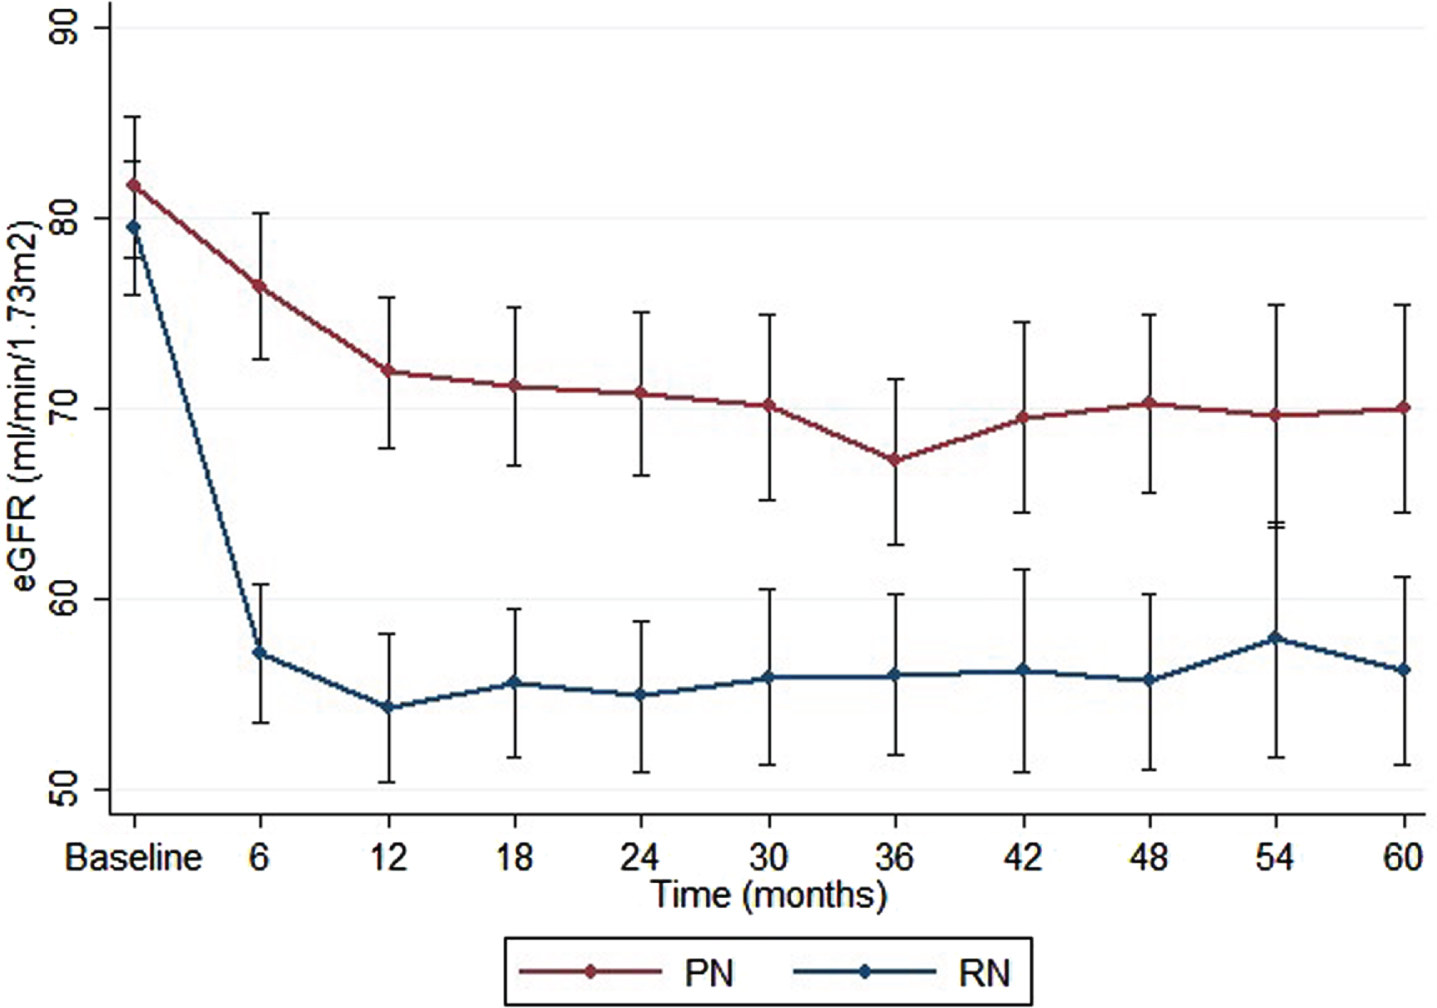 Renal function during 5-year follow-up period after RN vs. PN. Mean eGFR during 5-year follow-up, error bars represent 95% confidence interval (CI).